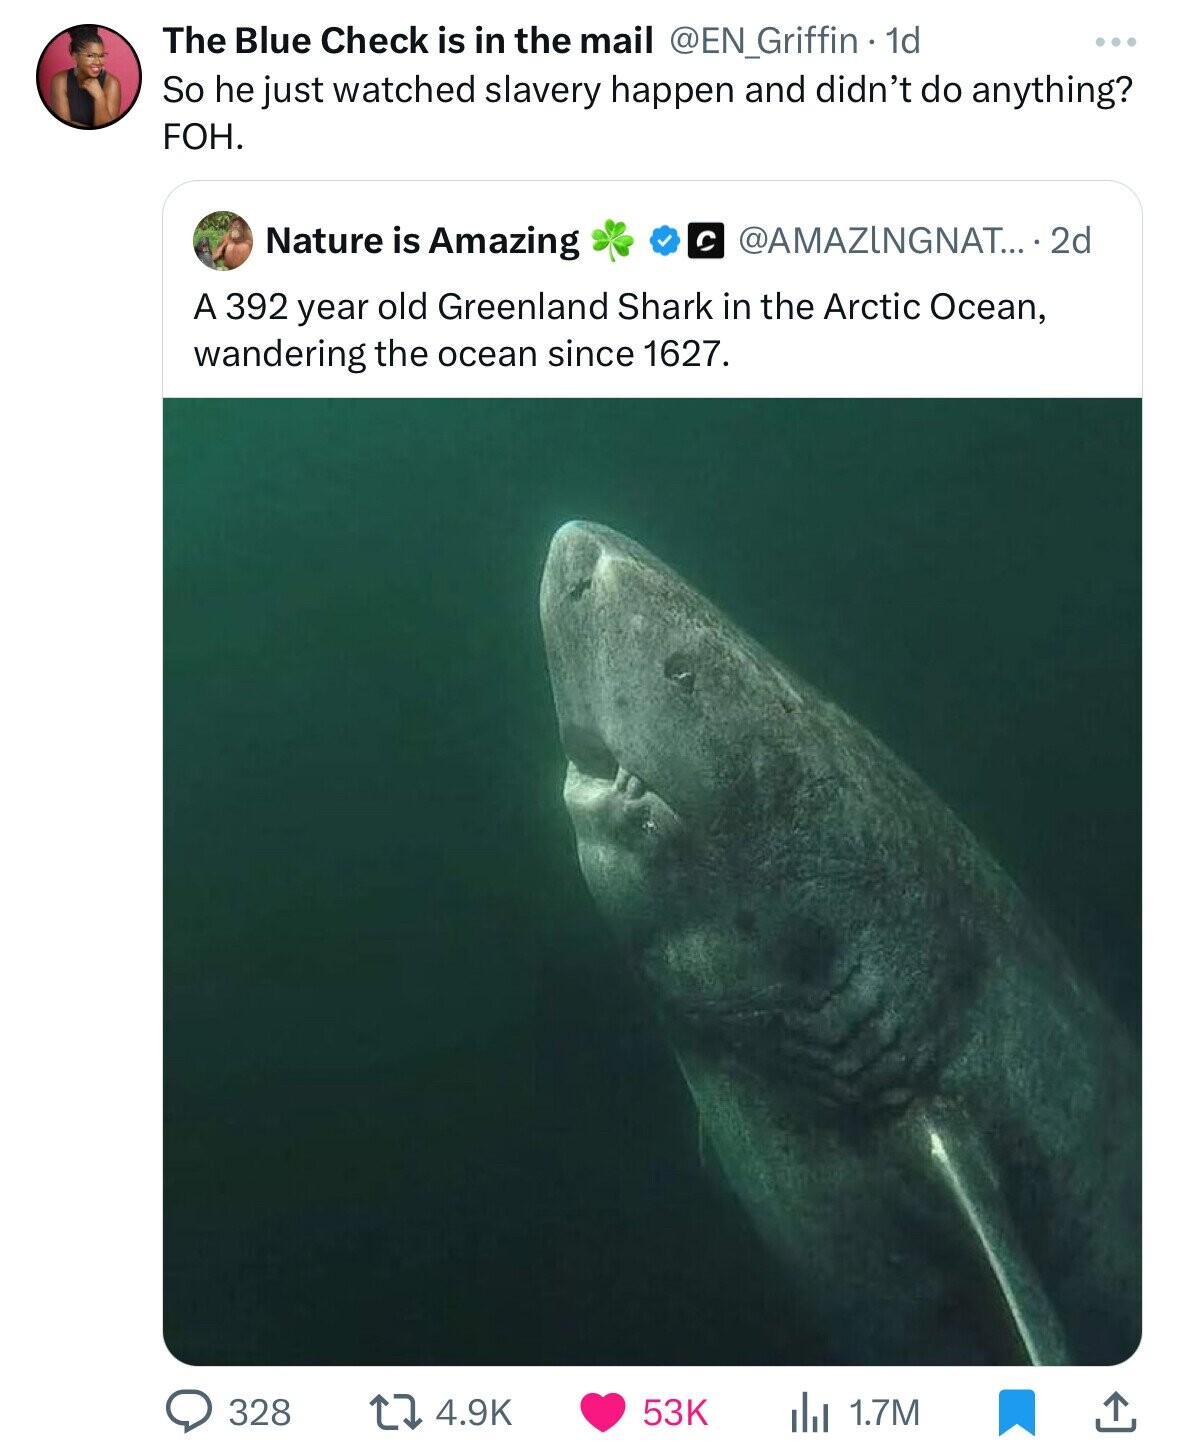 The Blue Check is in the mail @EN_Griffin - 1d So he just watched slavery happen and didn't do anything? FOH. @AMAZINGNAT... 2d Nature is Amazing A 392 year old Greenland Shark in the Arctic Ocean, wandering the ocean since 1627. 328 4.9K 53K 1.7M 